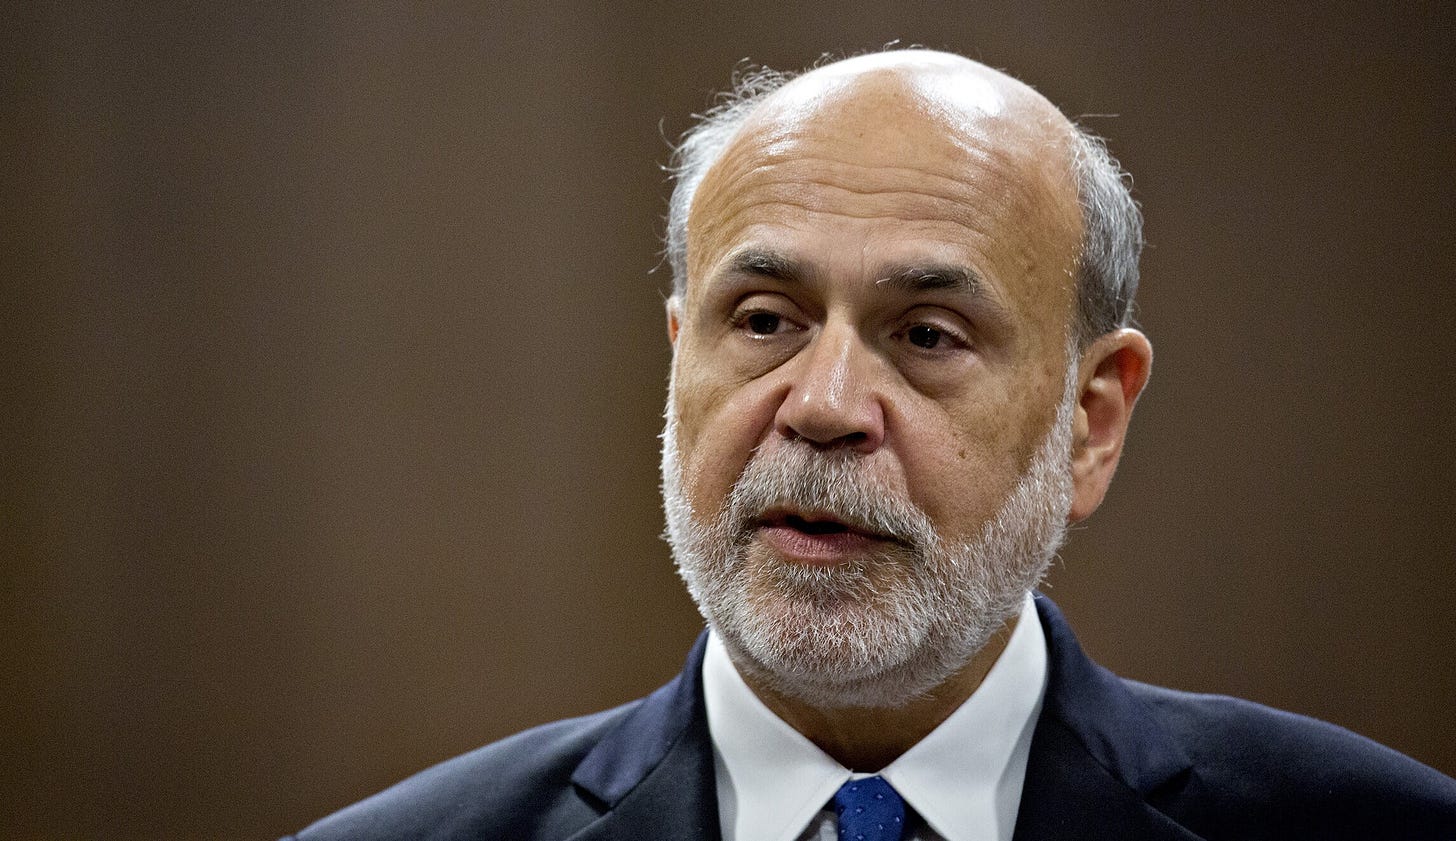 Ben Bernanke predicts Fed will discuss changing inflation target in 2019